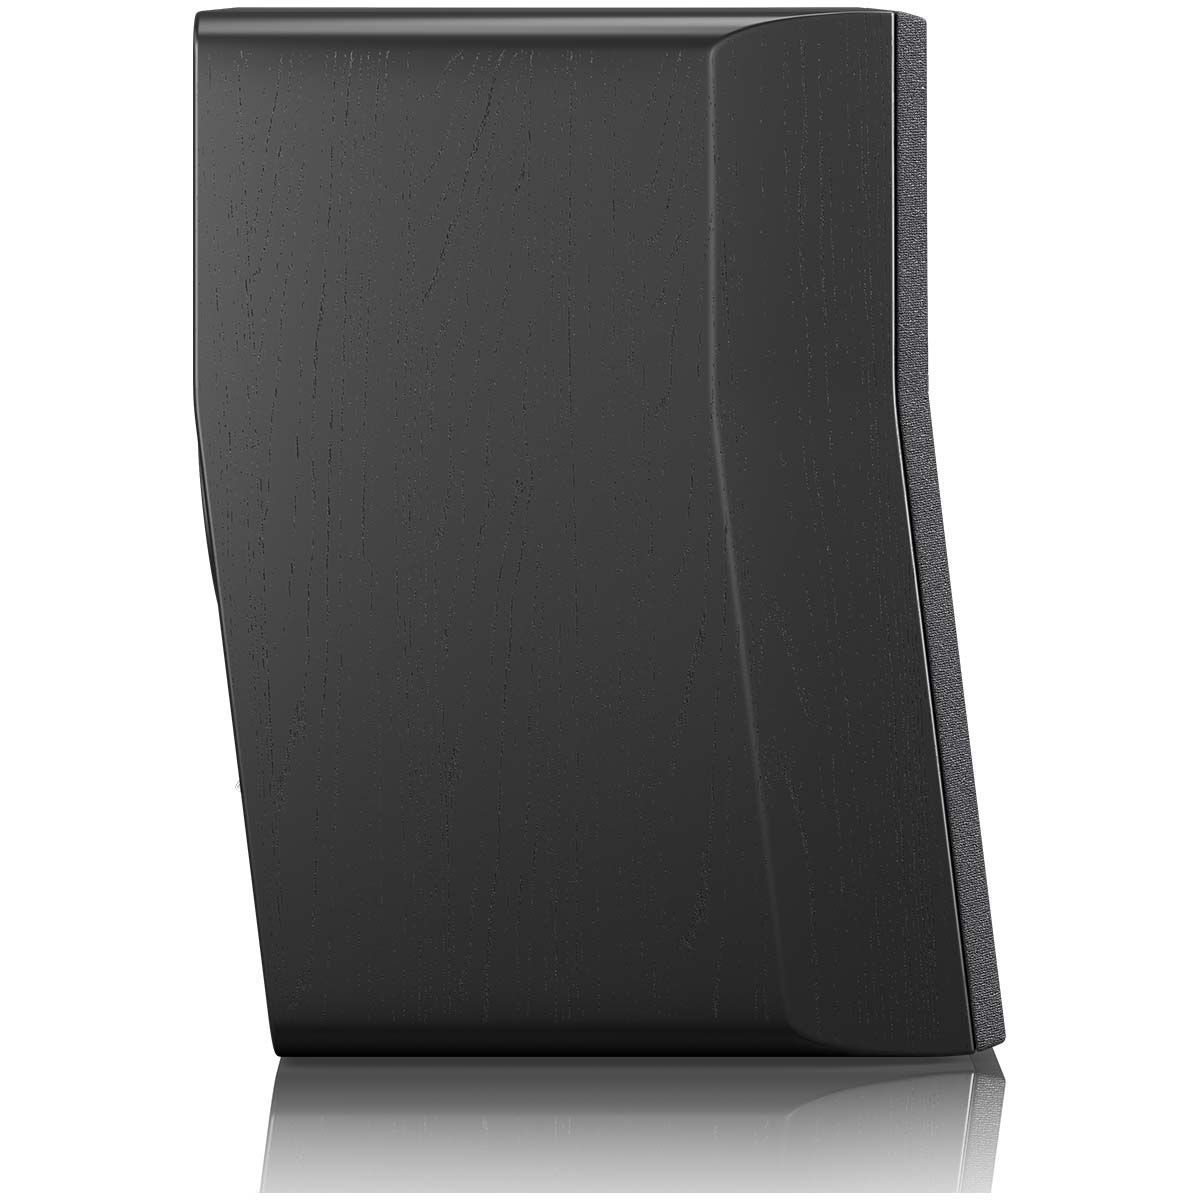 SVS Ultra Evolution Nano Bookshelf Speaker - single black oak with grille - angled rear view without components